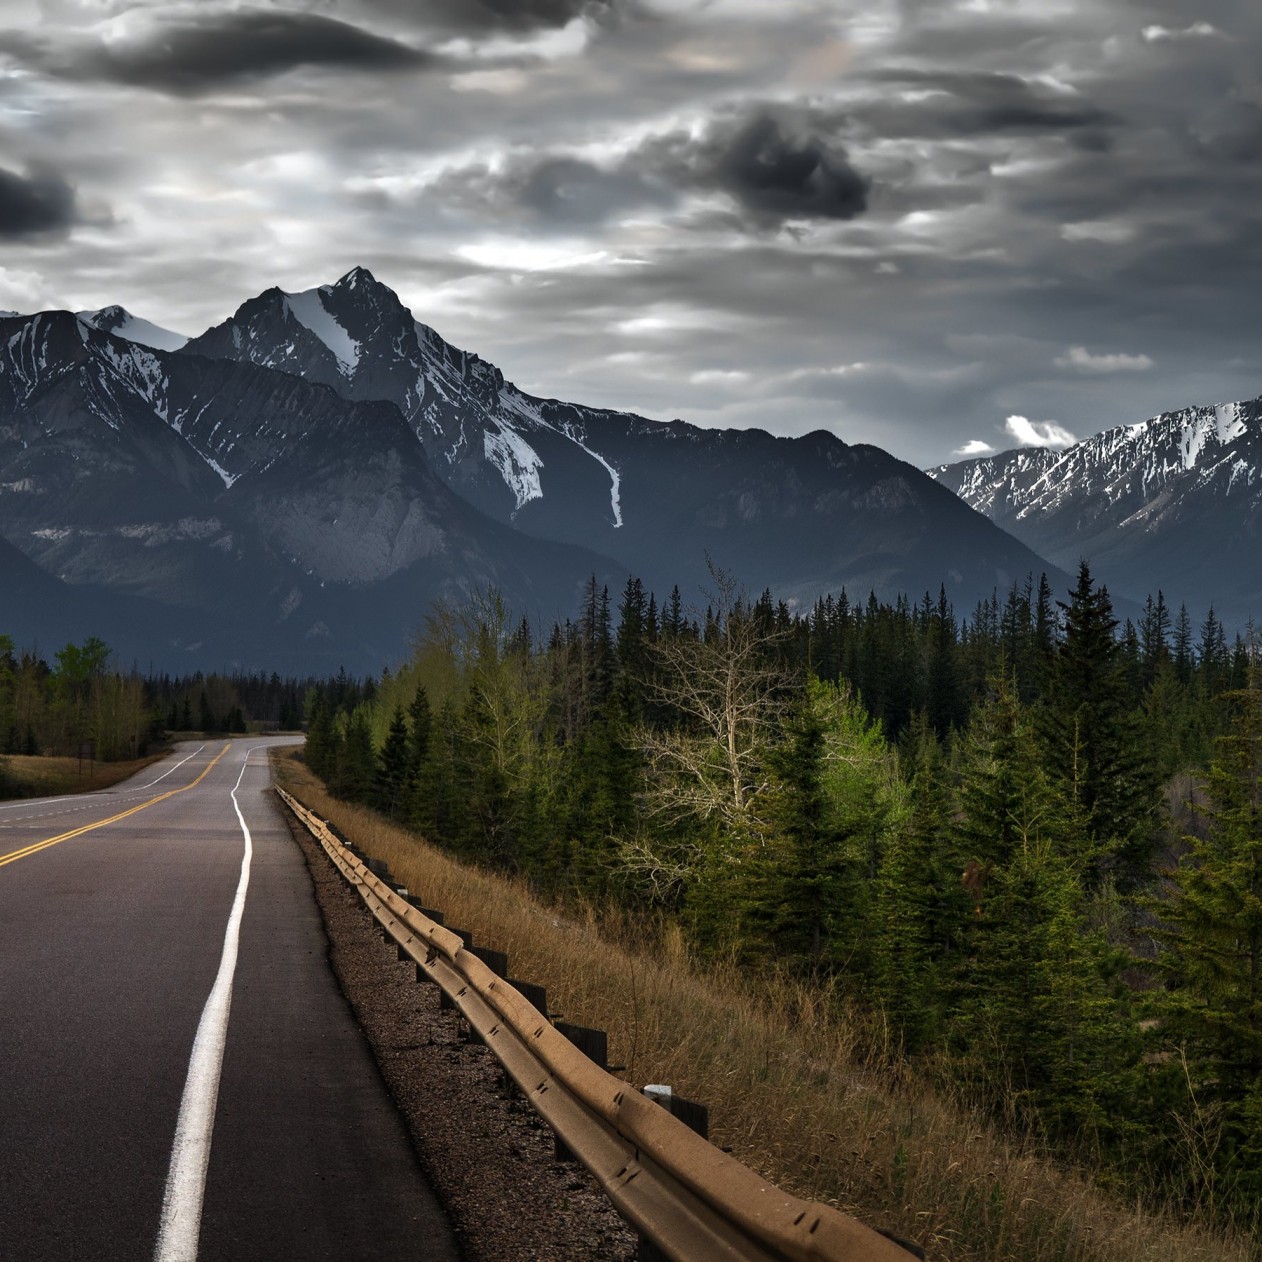 Road trip on a stormy day, Canada Wallpaper for Apple iPad mini